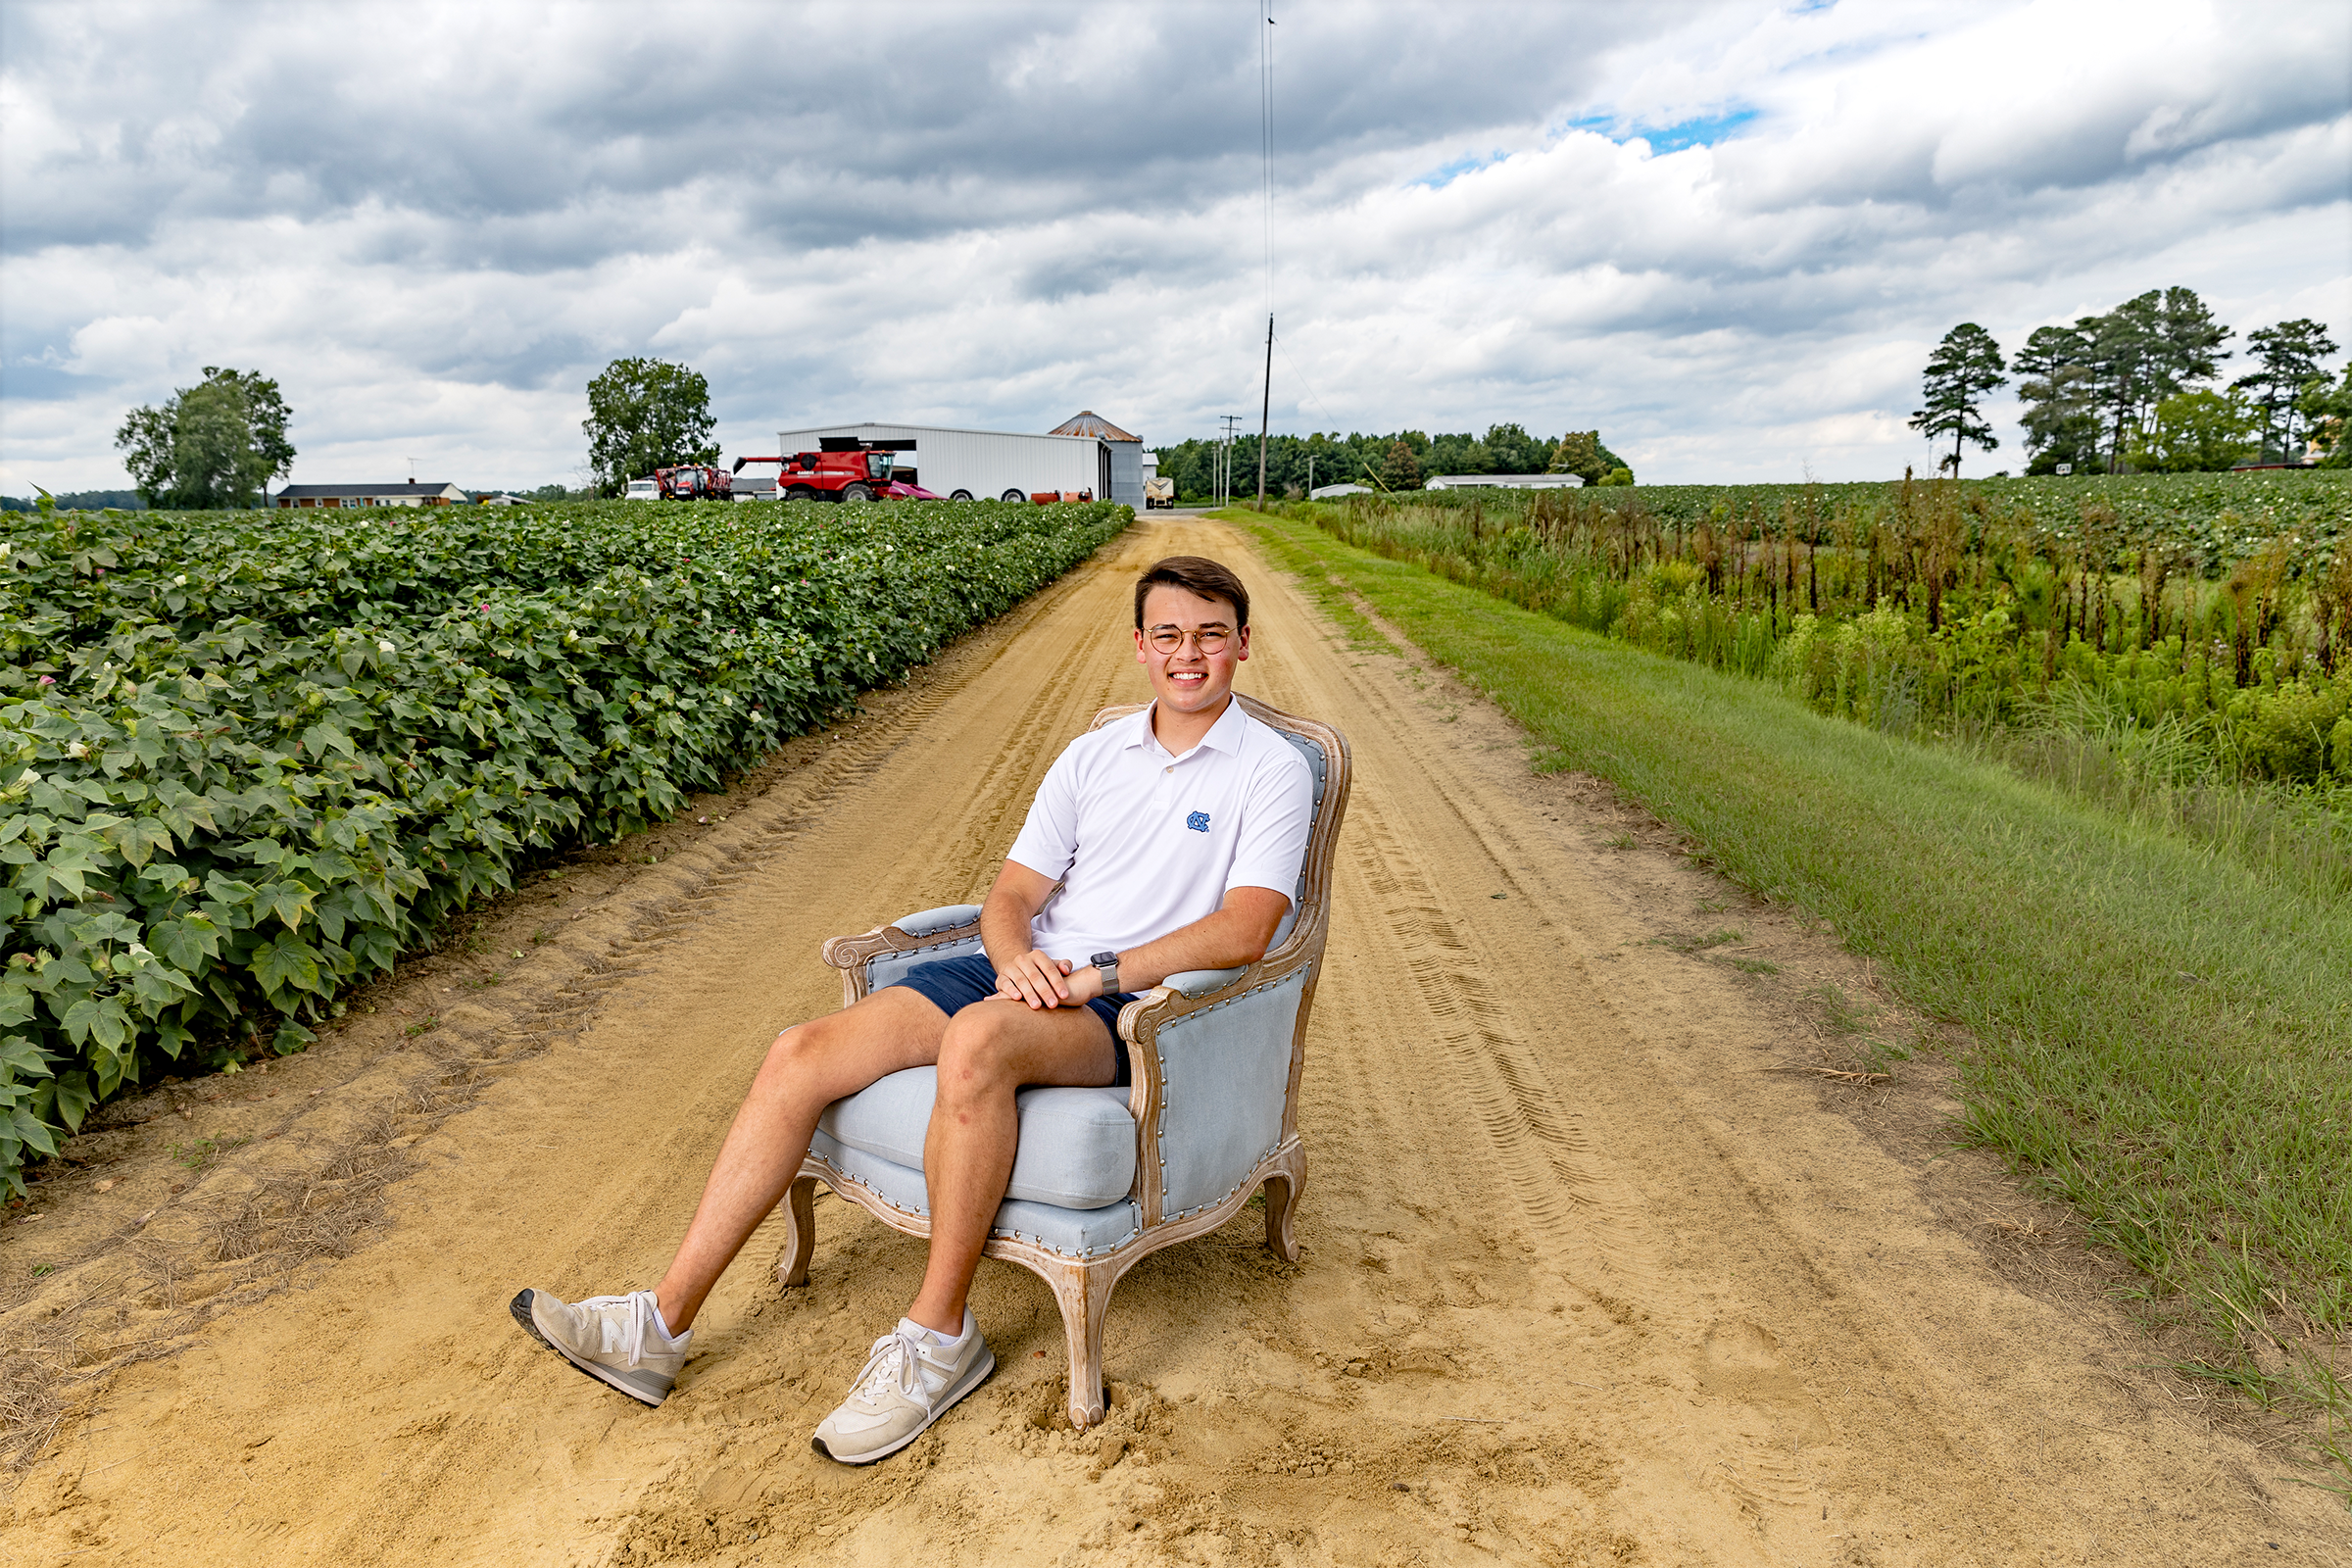 A man named Haygen Warren sitting in a blue chair and posing for a portrait on a dirt road on a farm.